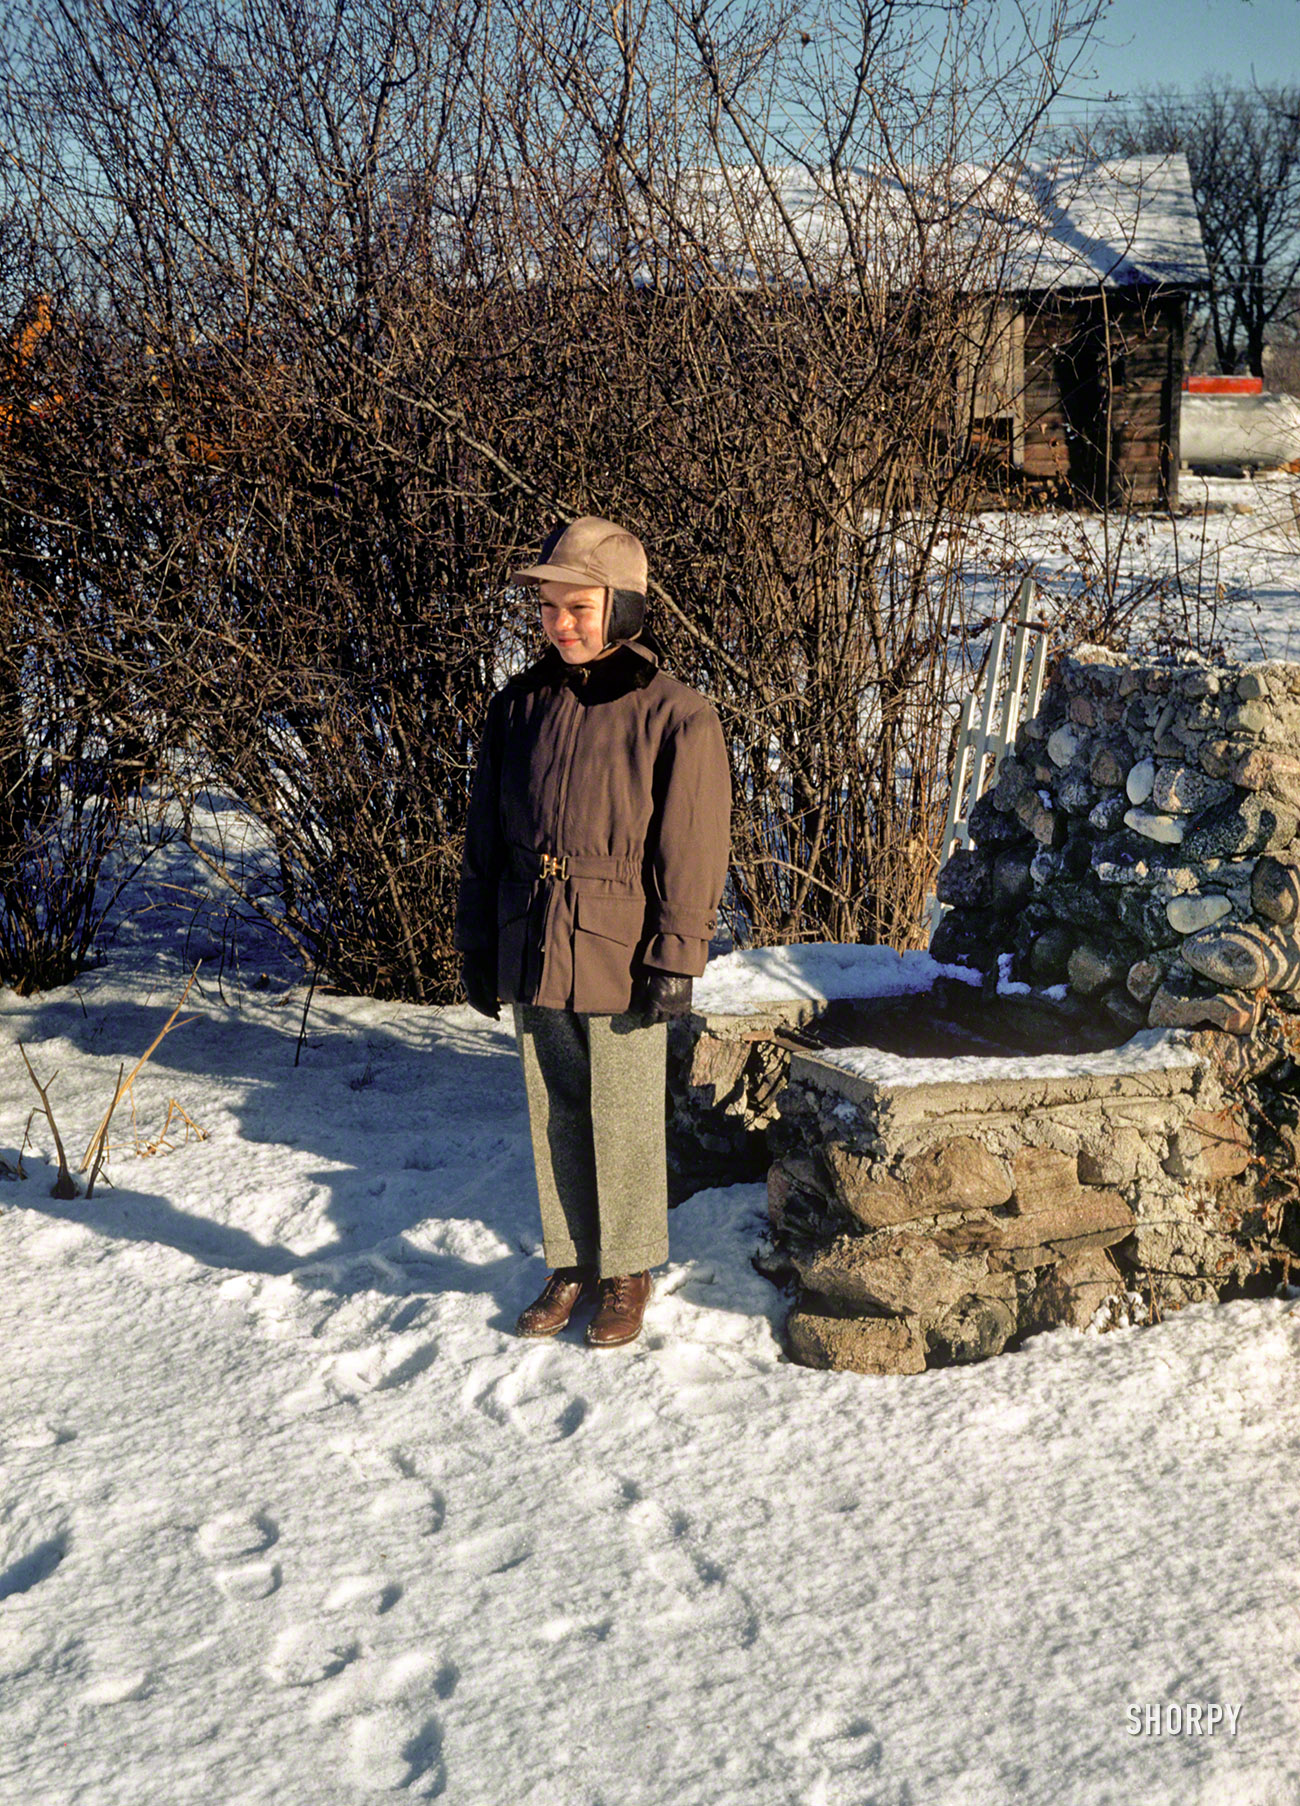 "Loren at Folks -- January 20, 1952." The latest episode of Minnesota Kodachromes stars Hubert's young nephew. Color slide by Hubert Tuttle; barbecue by the Mayans or Aztecs. View full size.